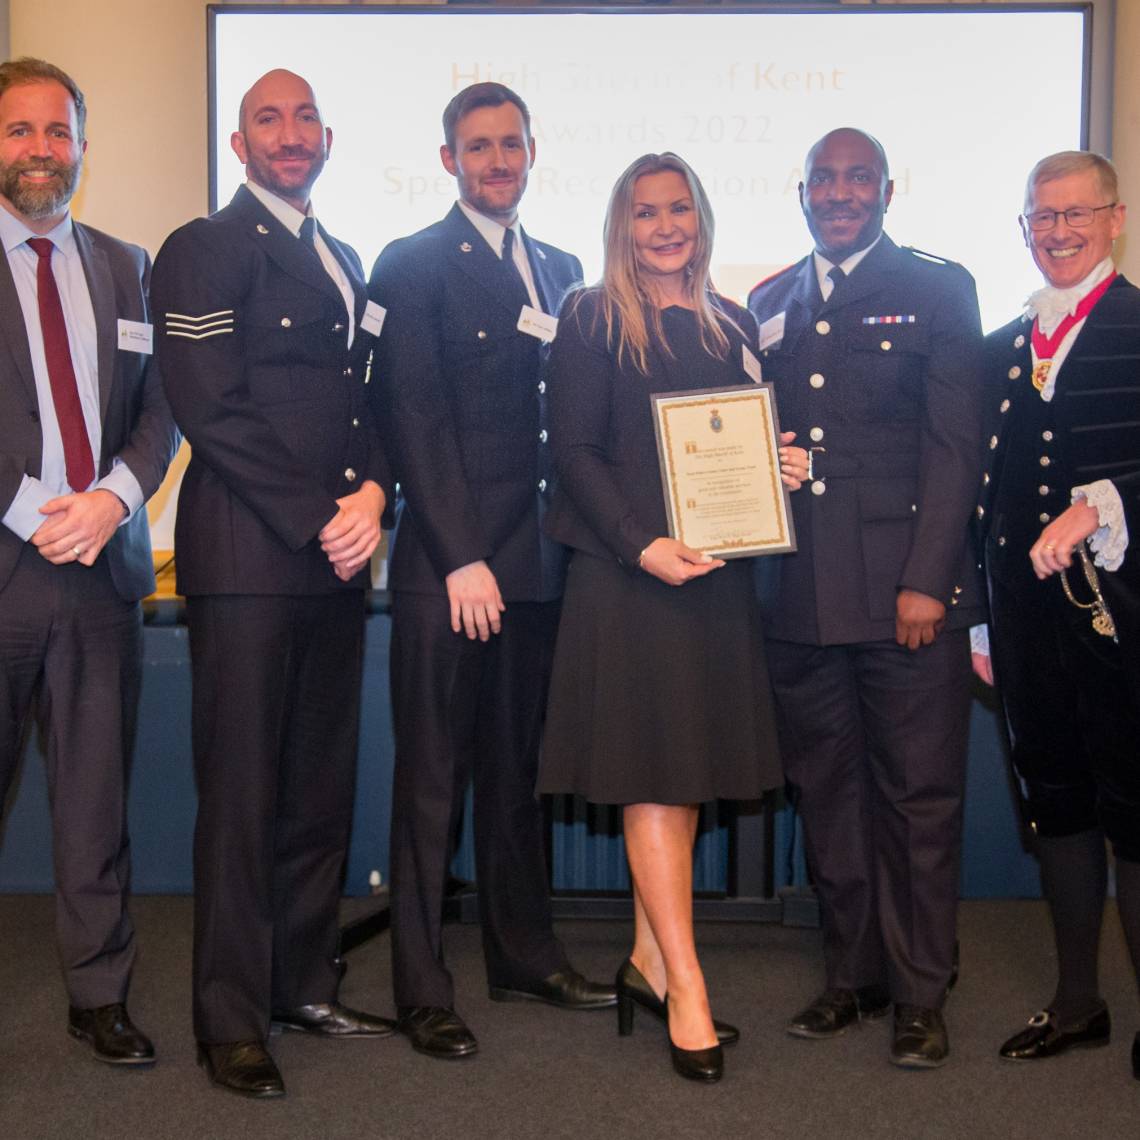 High Sheriff Award winner - Kent Police County Lines and Gangs Team